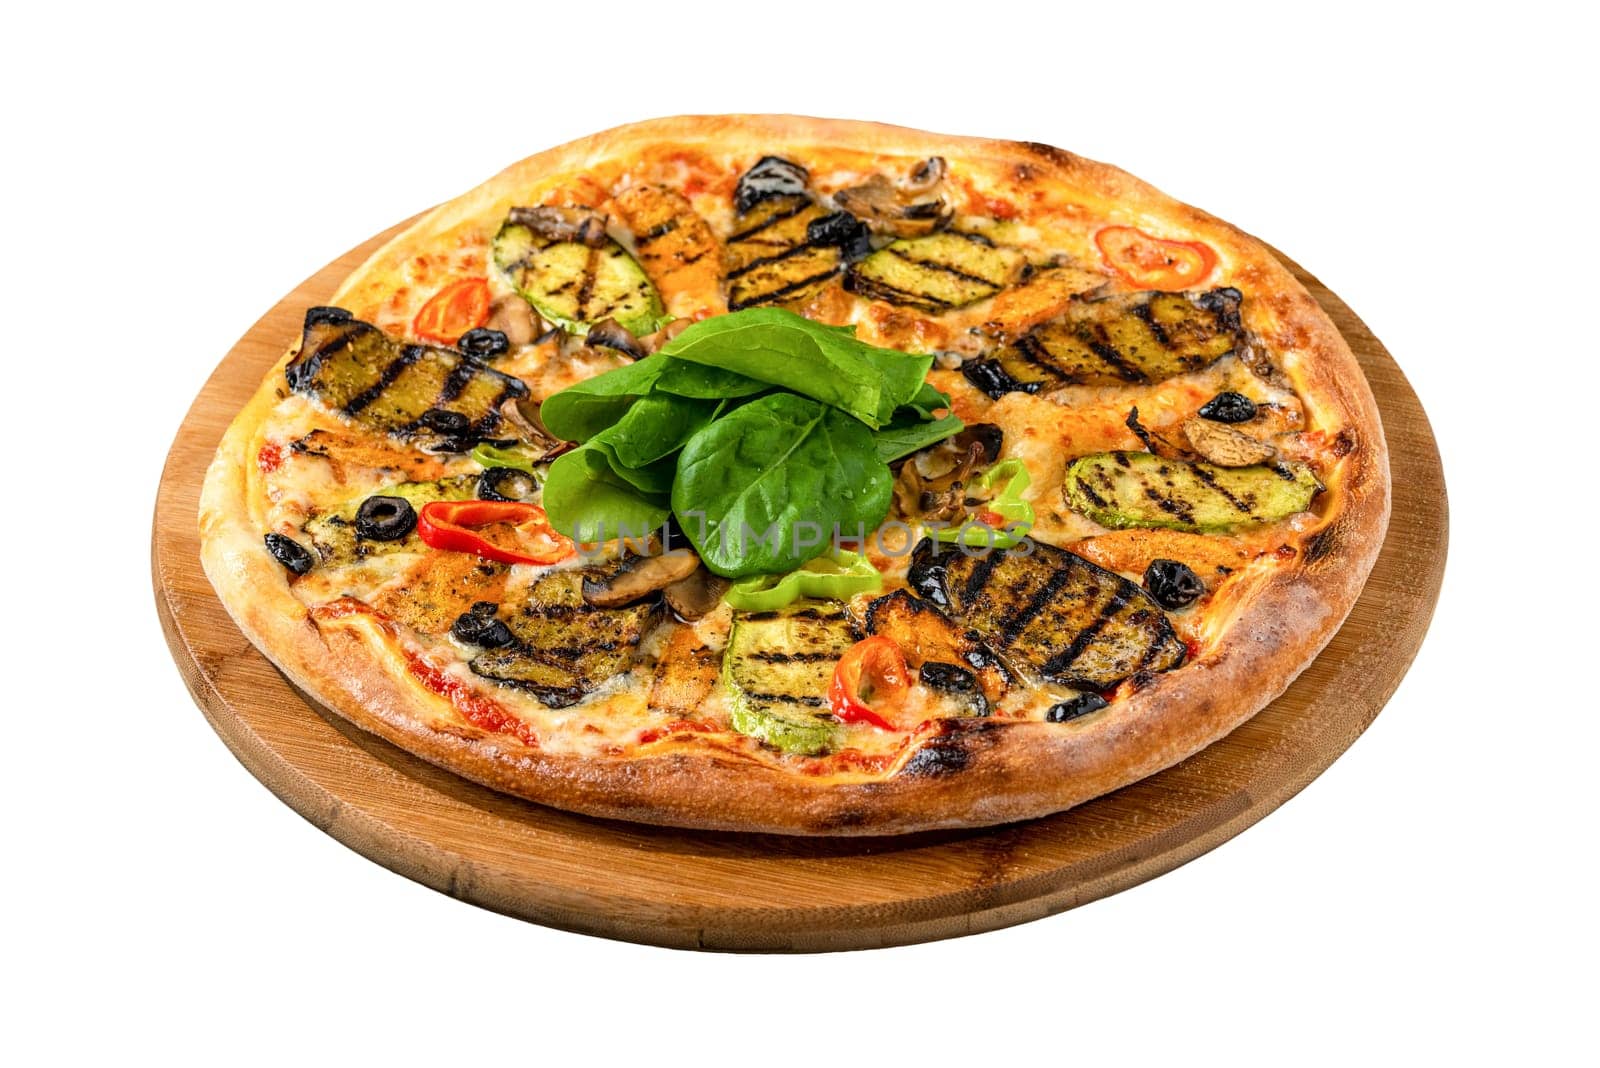 vegetarian pizza with eggplant and zucchini on white background by Sonat